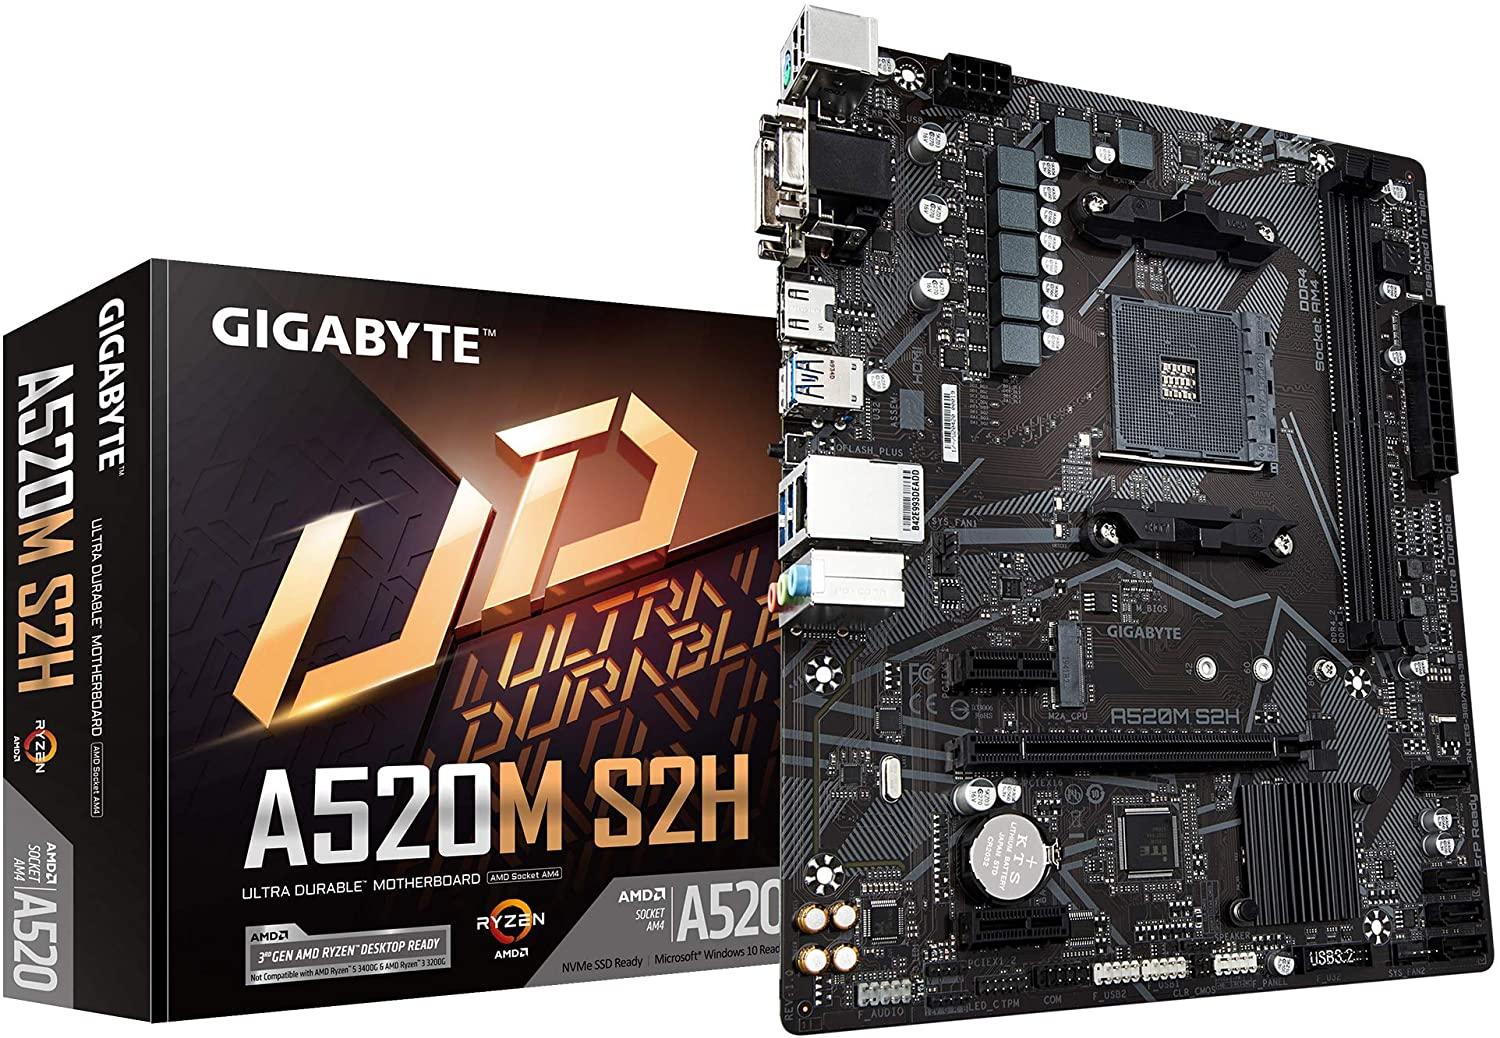 Gigabyte A520M S2H AMD AM4 RGB Fusion 2.0 Motherboard for $50.30 Shipped